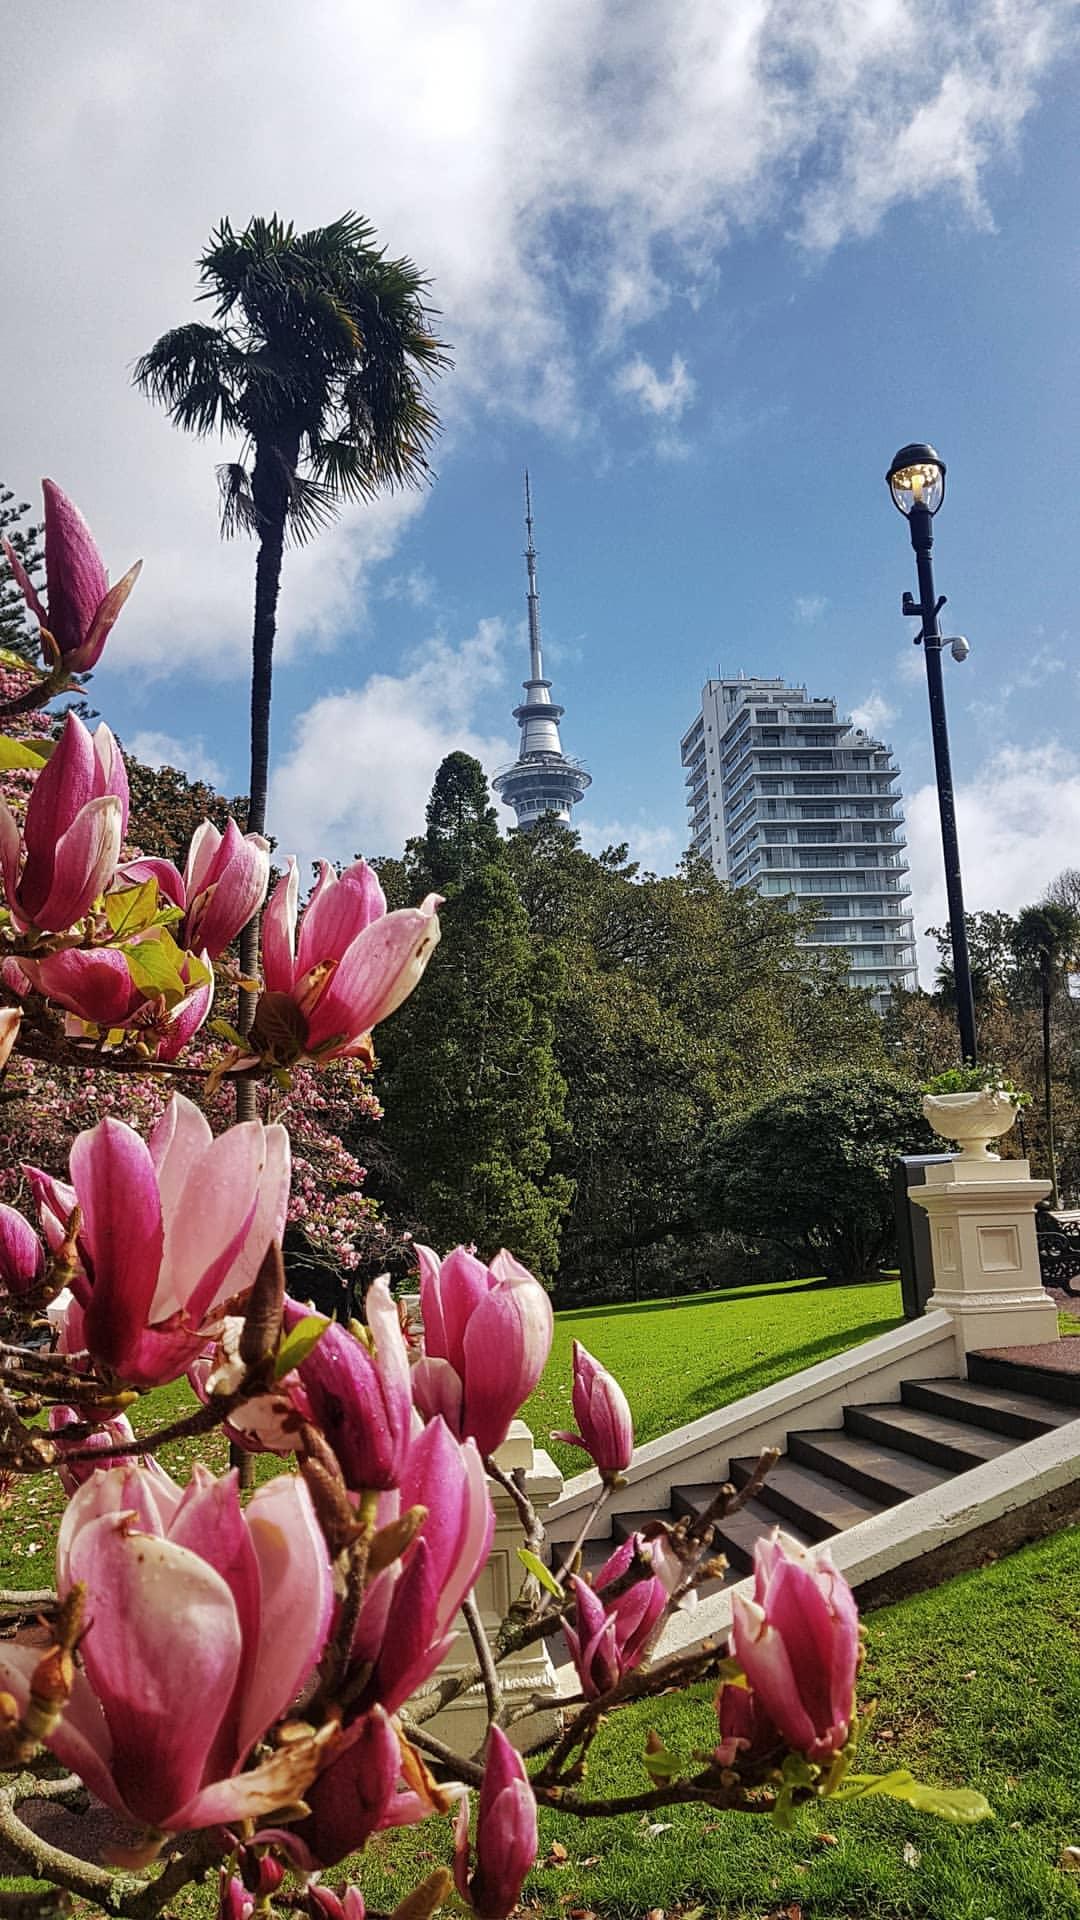 Auckland in spring